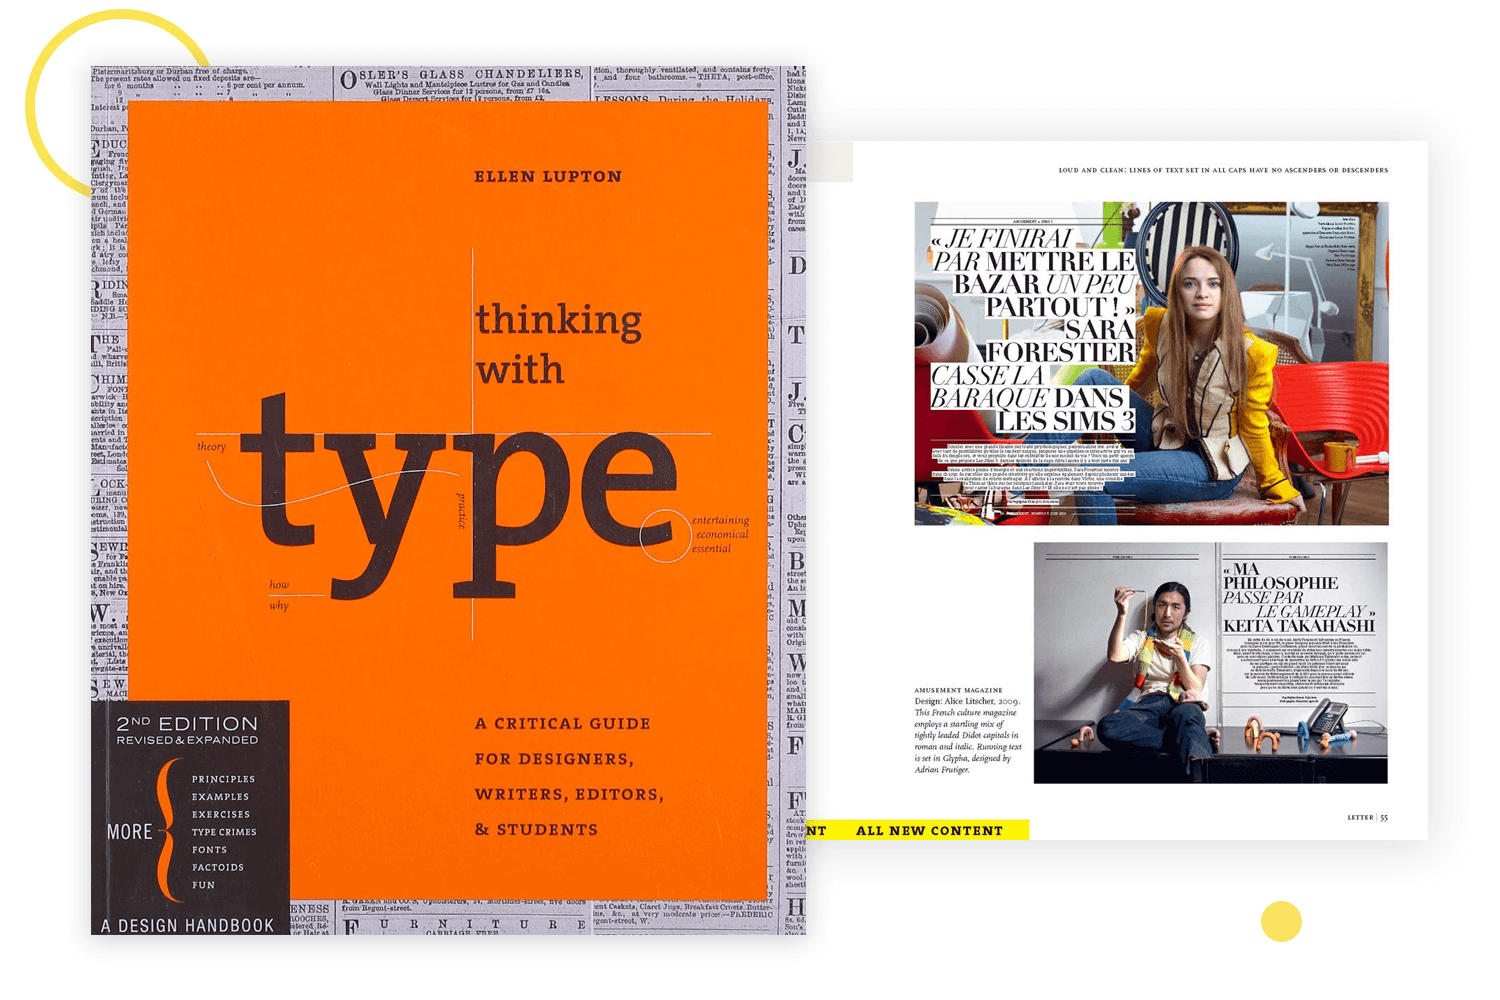 thinking with type - web design book